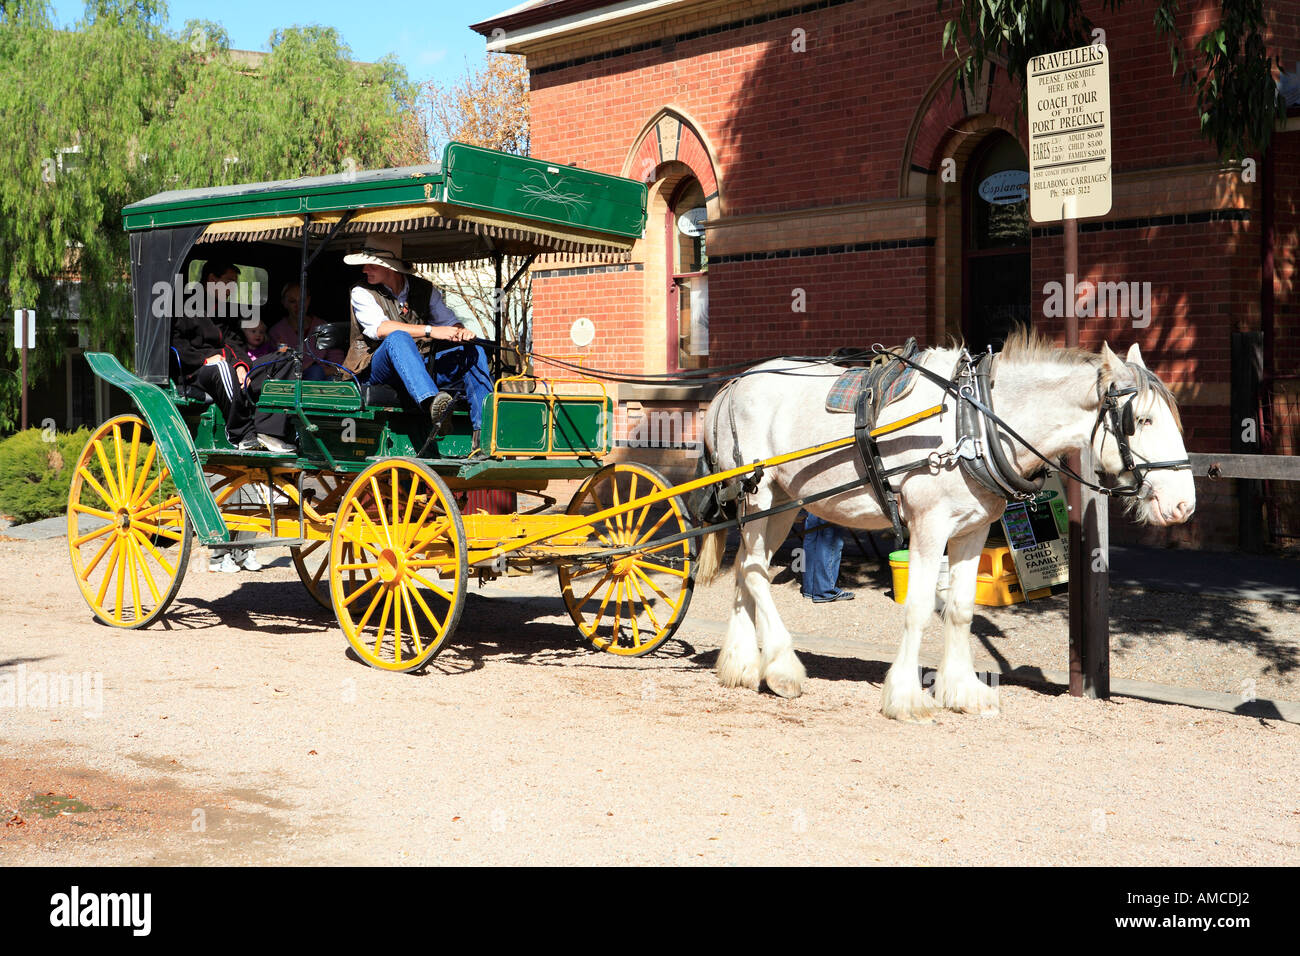 Green and yellow carriage and draught horse on Murray Esplanade, Echuca, Victoria, Australia Stock Photo